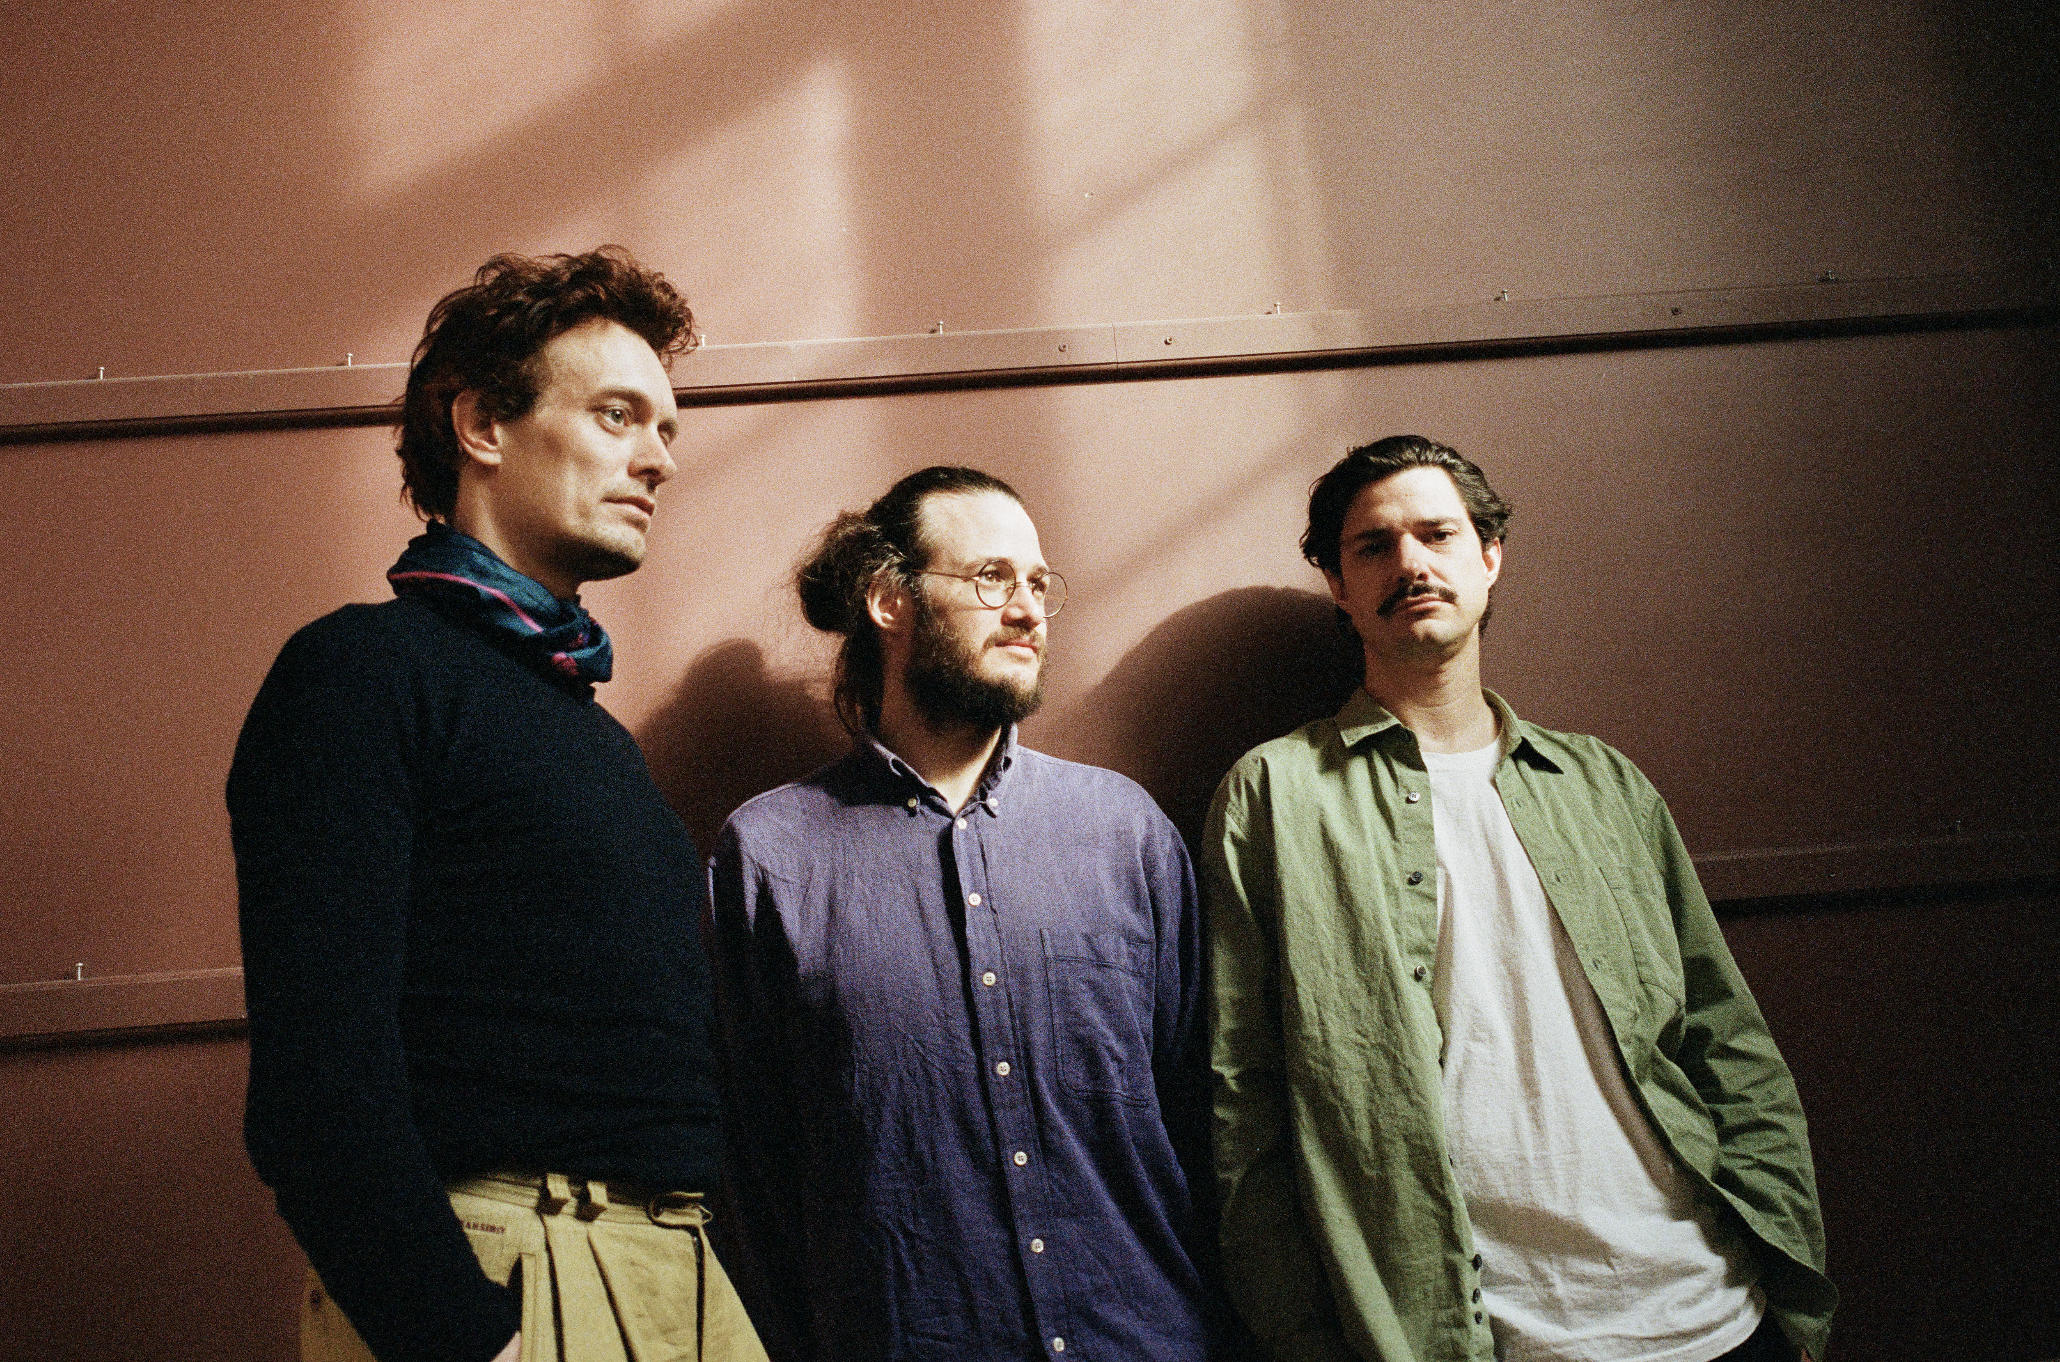 Efterklang – excitement is the basis of my relationship to music